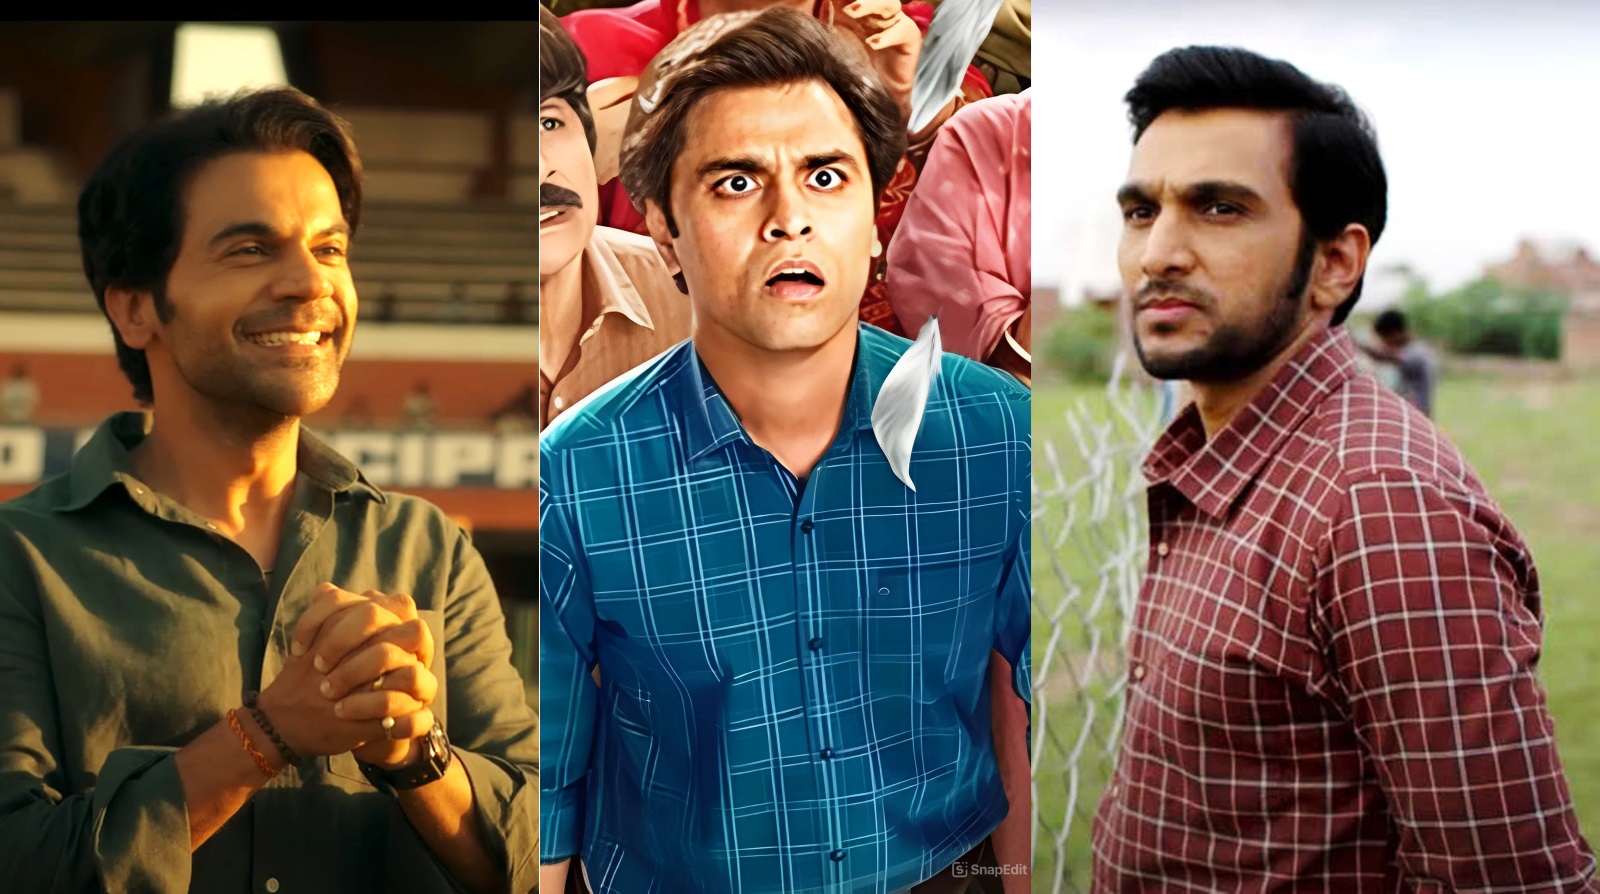 6 New Indian Movies & Shows Releasing This Week (27th May – 2nd June) We Are Super Excited About